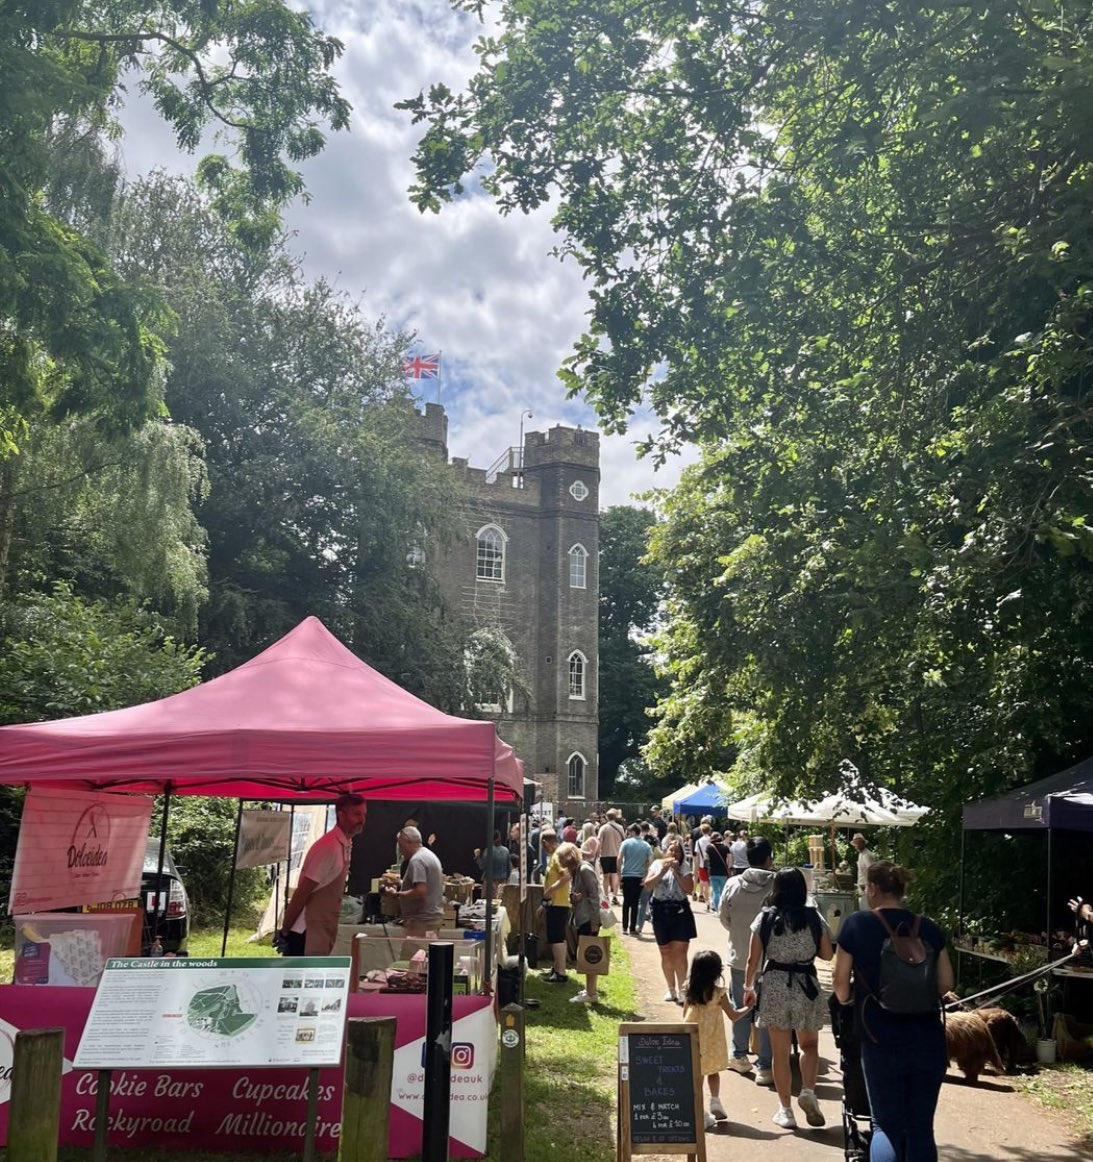 Coming to Severndroog this Sunday 7th April, the SEVERNDROOG PRODUCERS MARKET is back 🍰🕯️🌭🖼️💍 10am - 3pm Our Viewing Platform and Tea Room will also be open, so come up and see the view and have a cuppa.